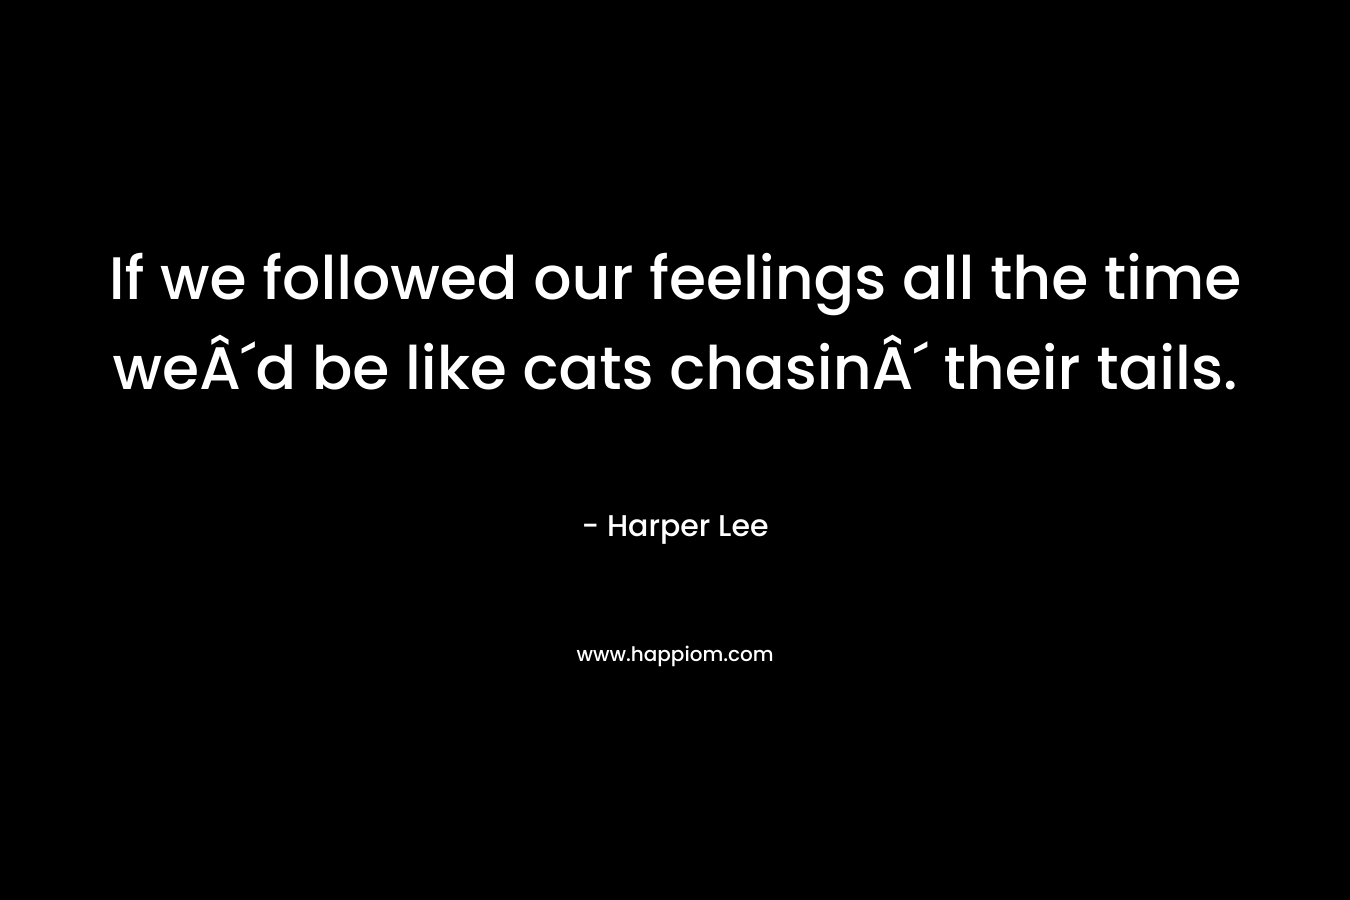 If we followed our feelings all the time weÂ´d be like cats chasinÂ´ their tails. – Harper Lee